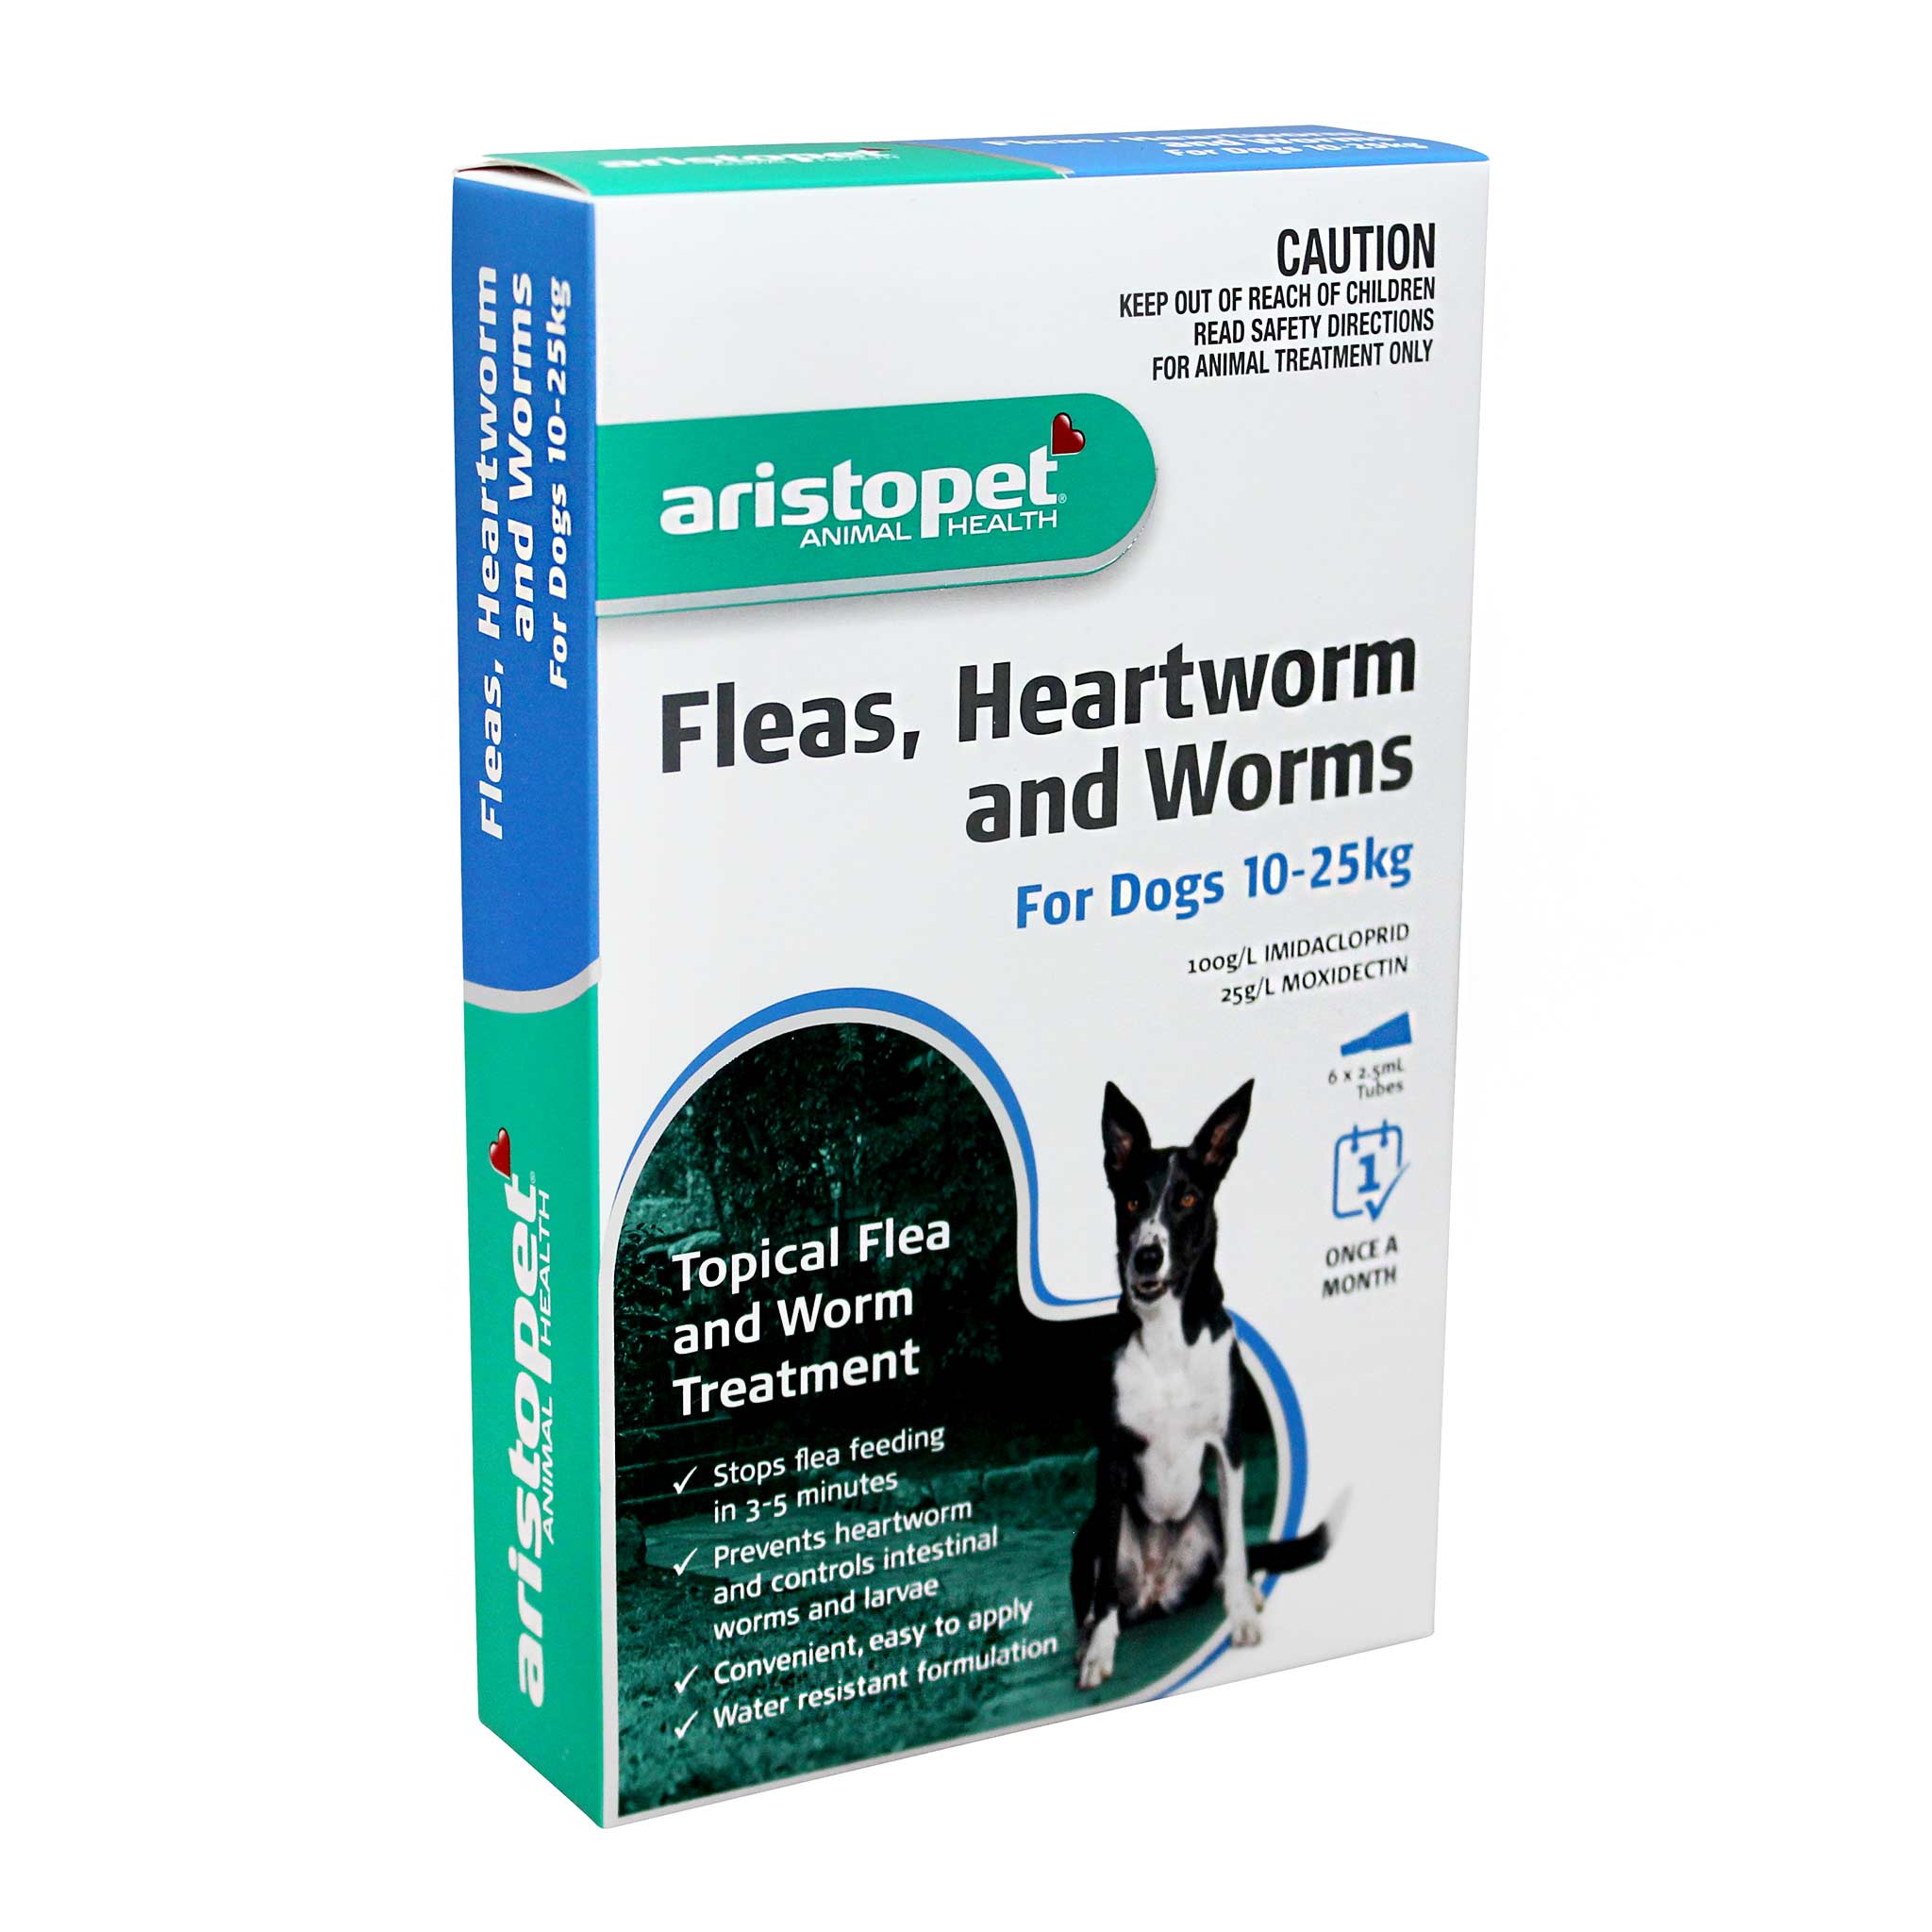 do dogs need to take heartworm pills every month